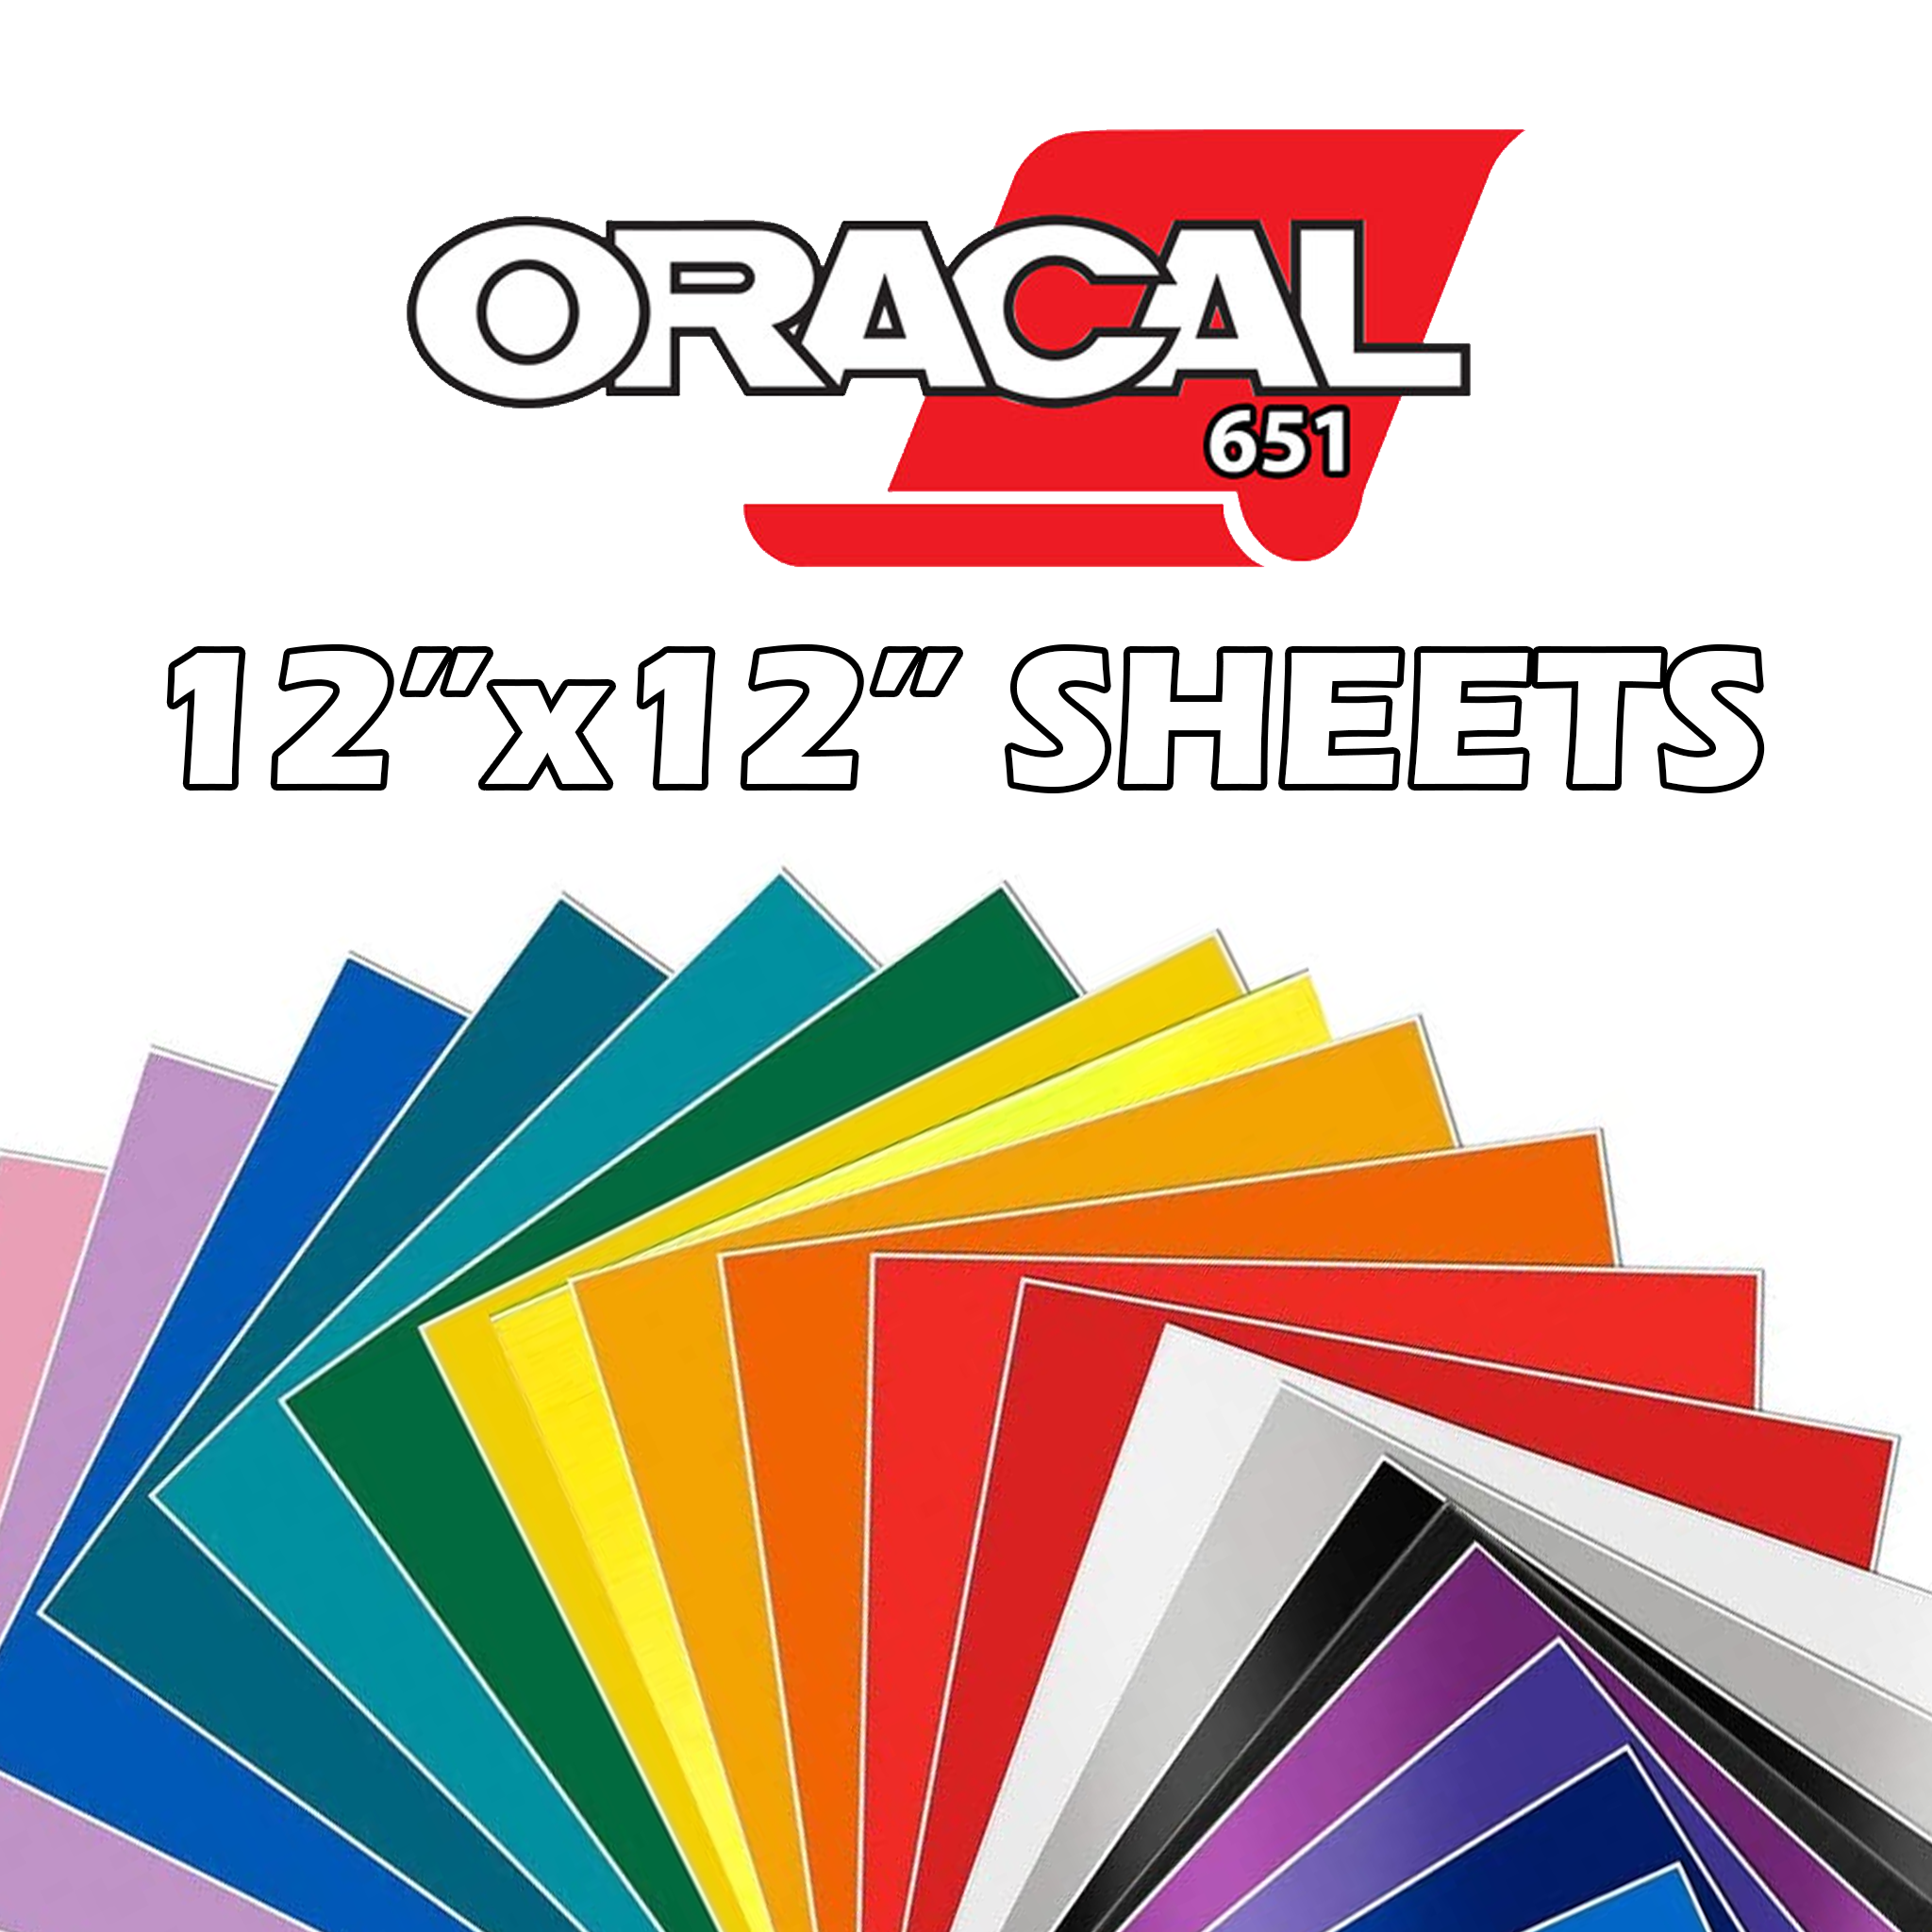 Oracal Clear Transfer Tape - 12 x 10' Roll